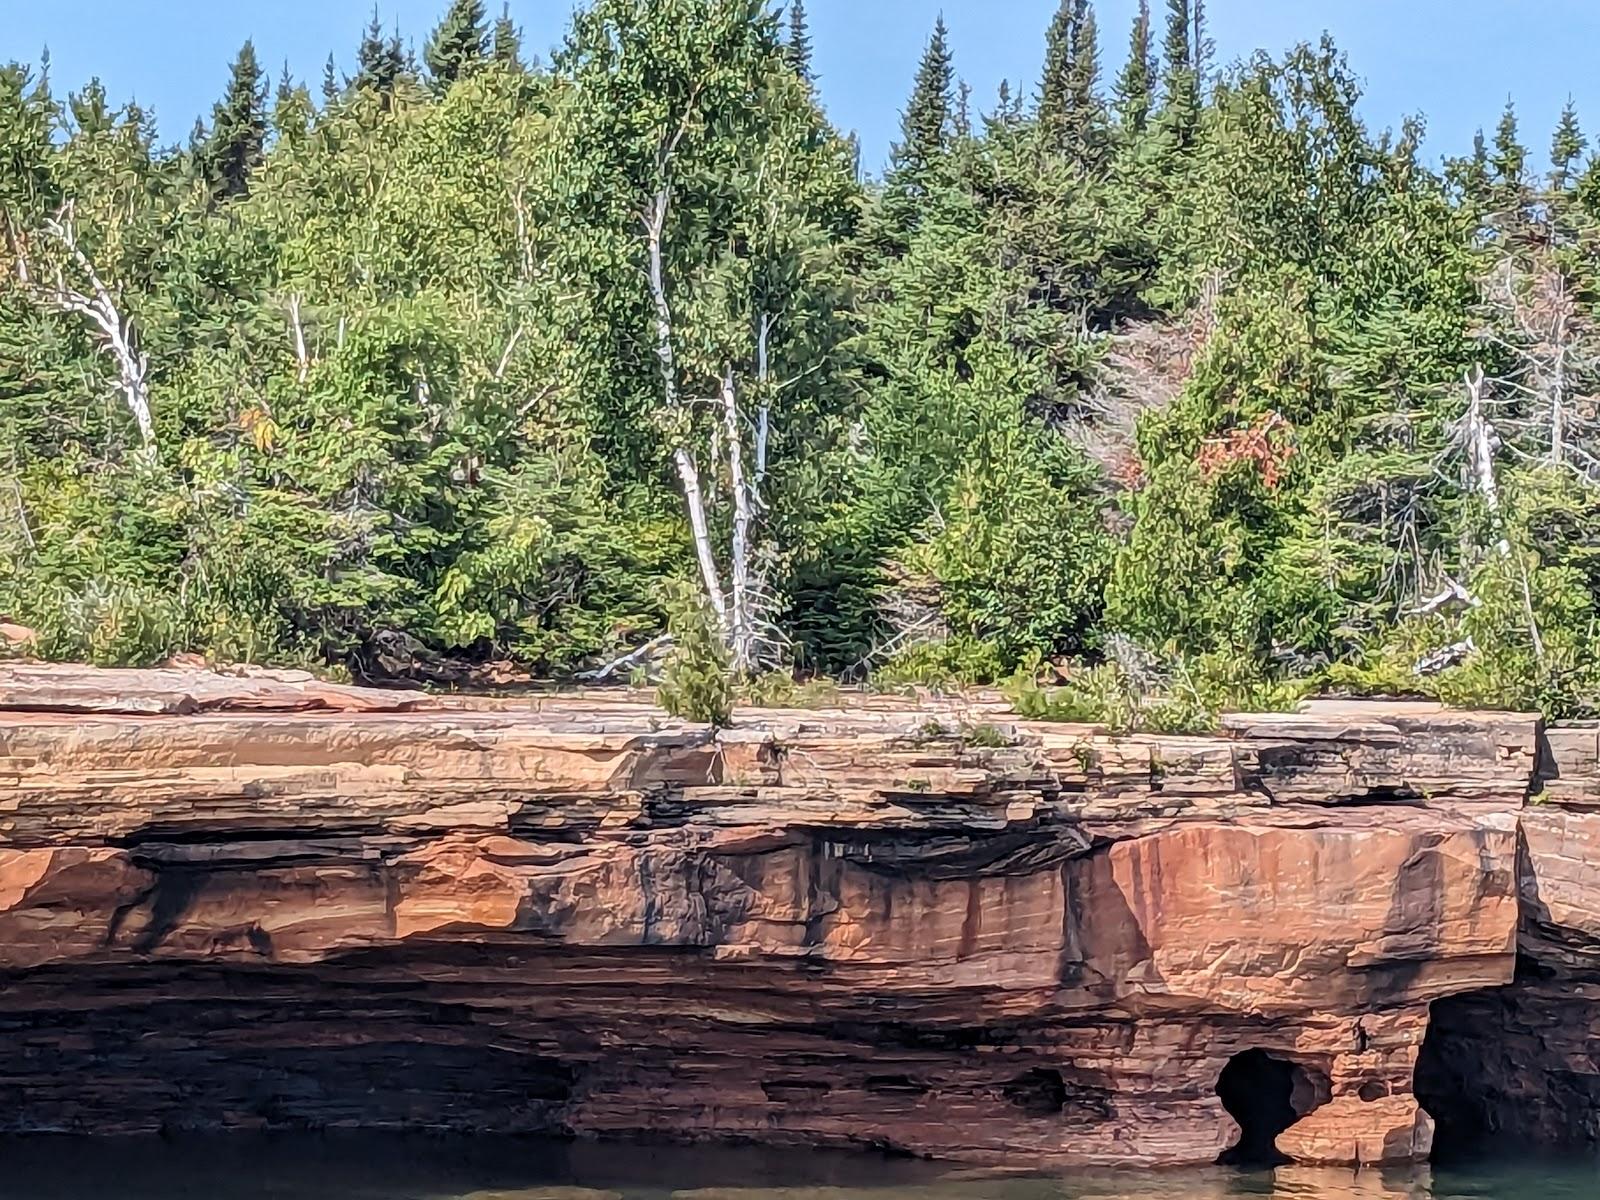 Sandee Apostle Islands Maritime Forests State Natural Area Photo